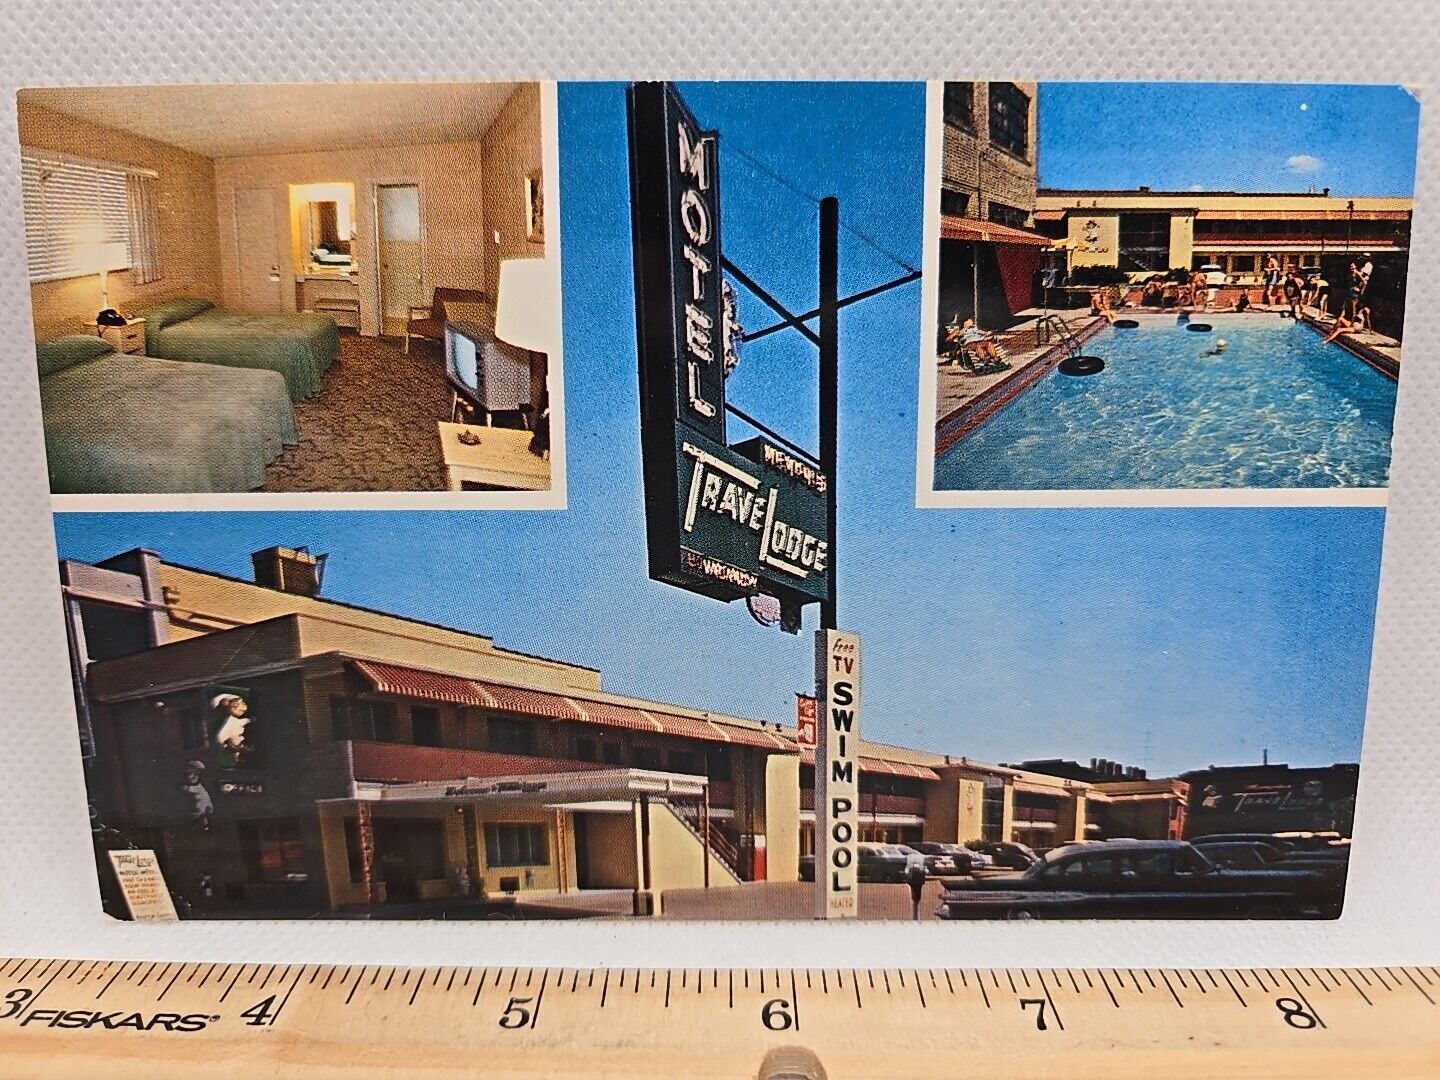 Vintage Postcard Memphis Tennessee Downtown Travel Lodge Motel Old Cars